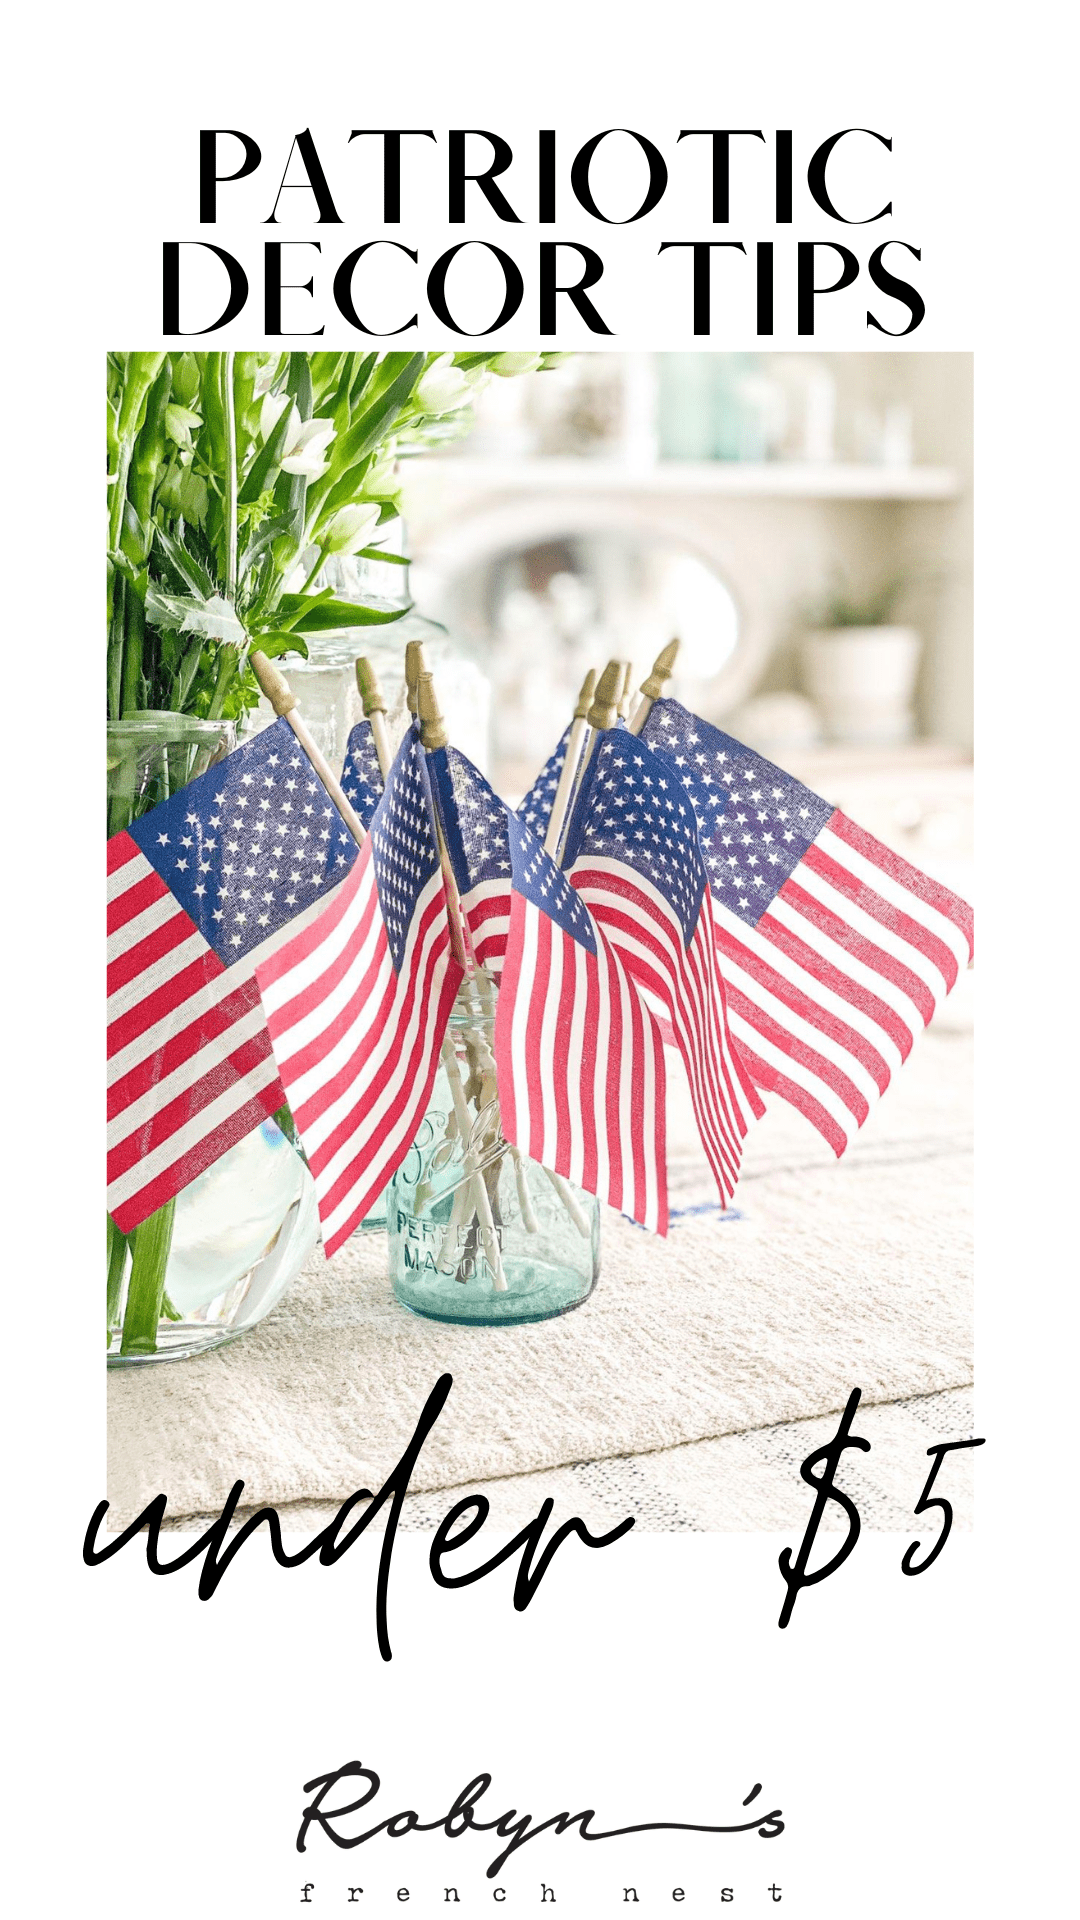 Four Patriotic Decor Tips for Under Five Dollars